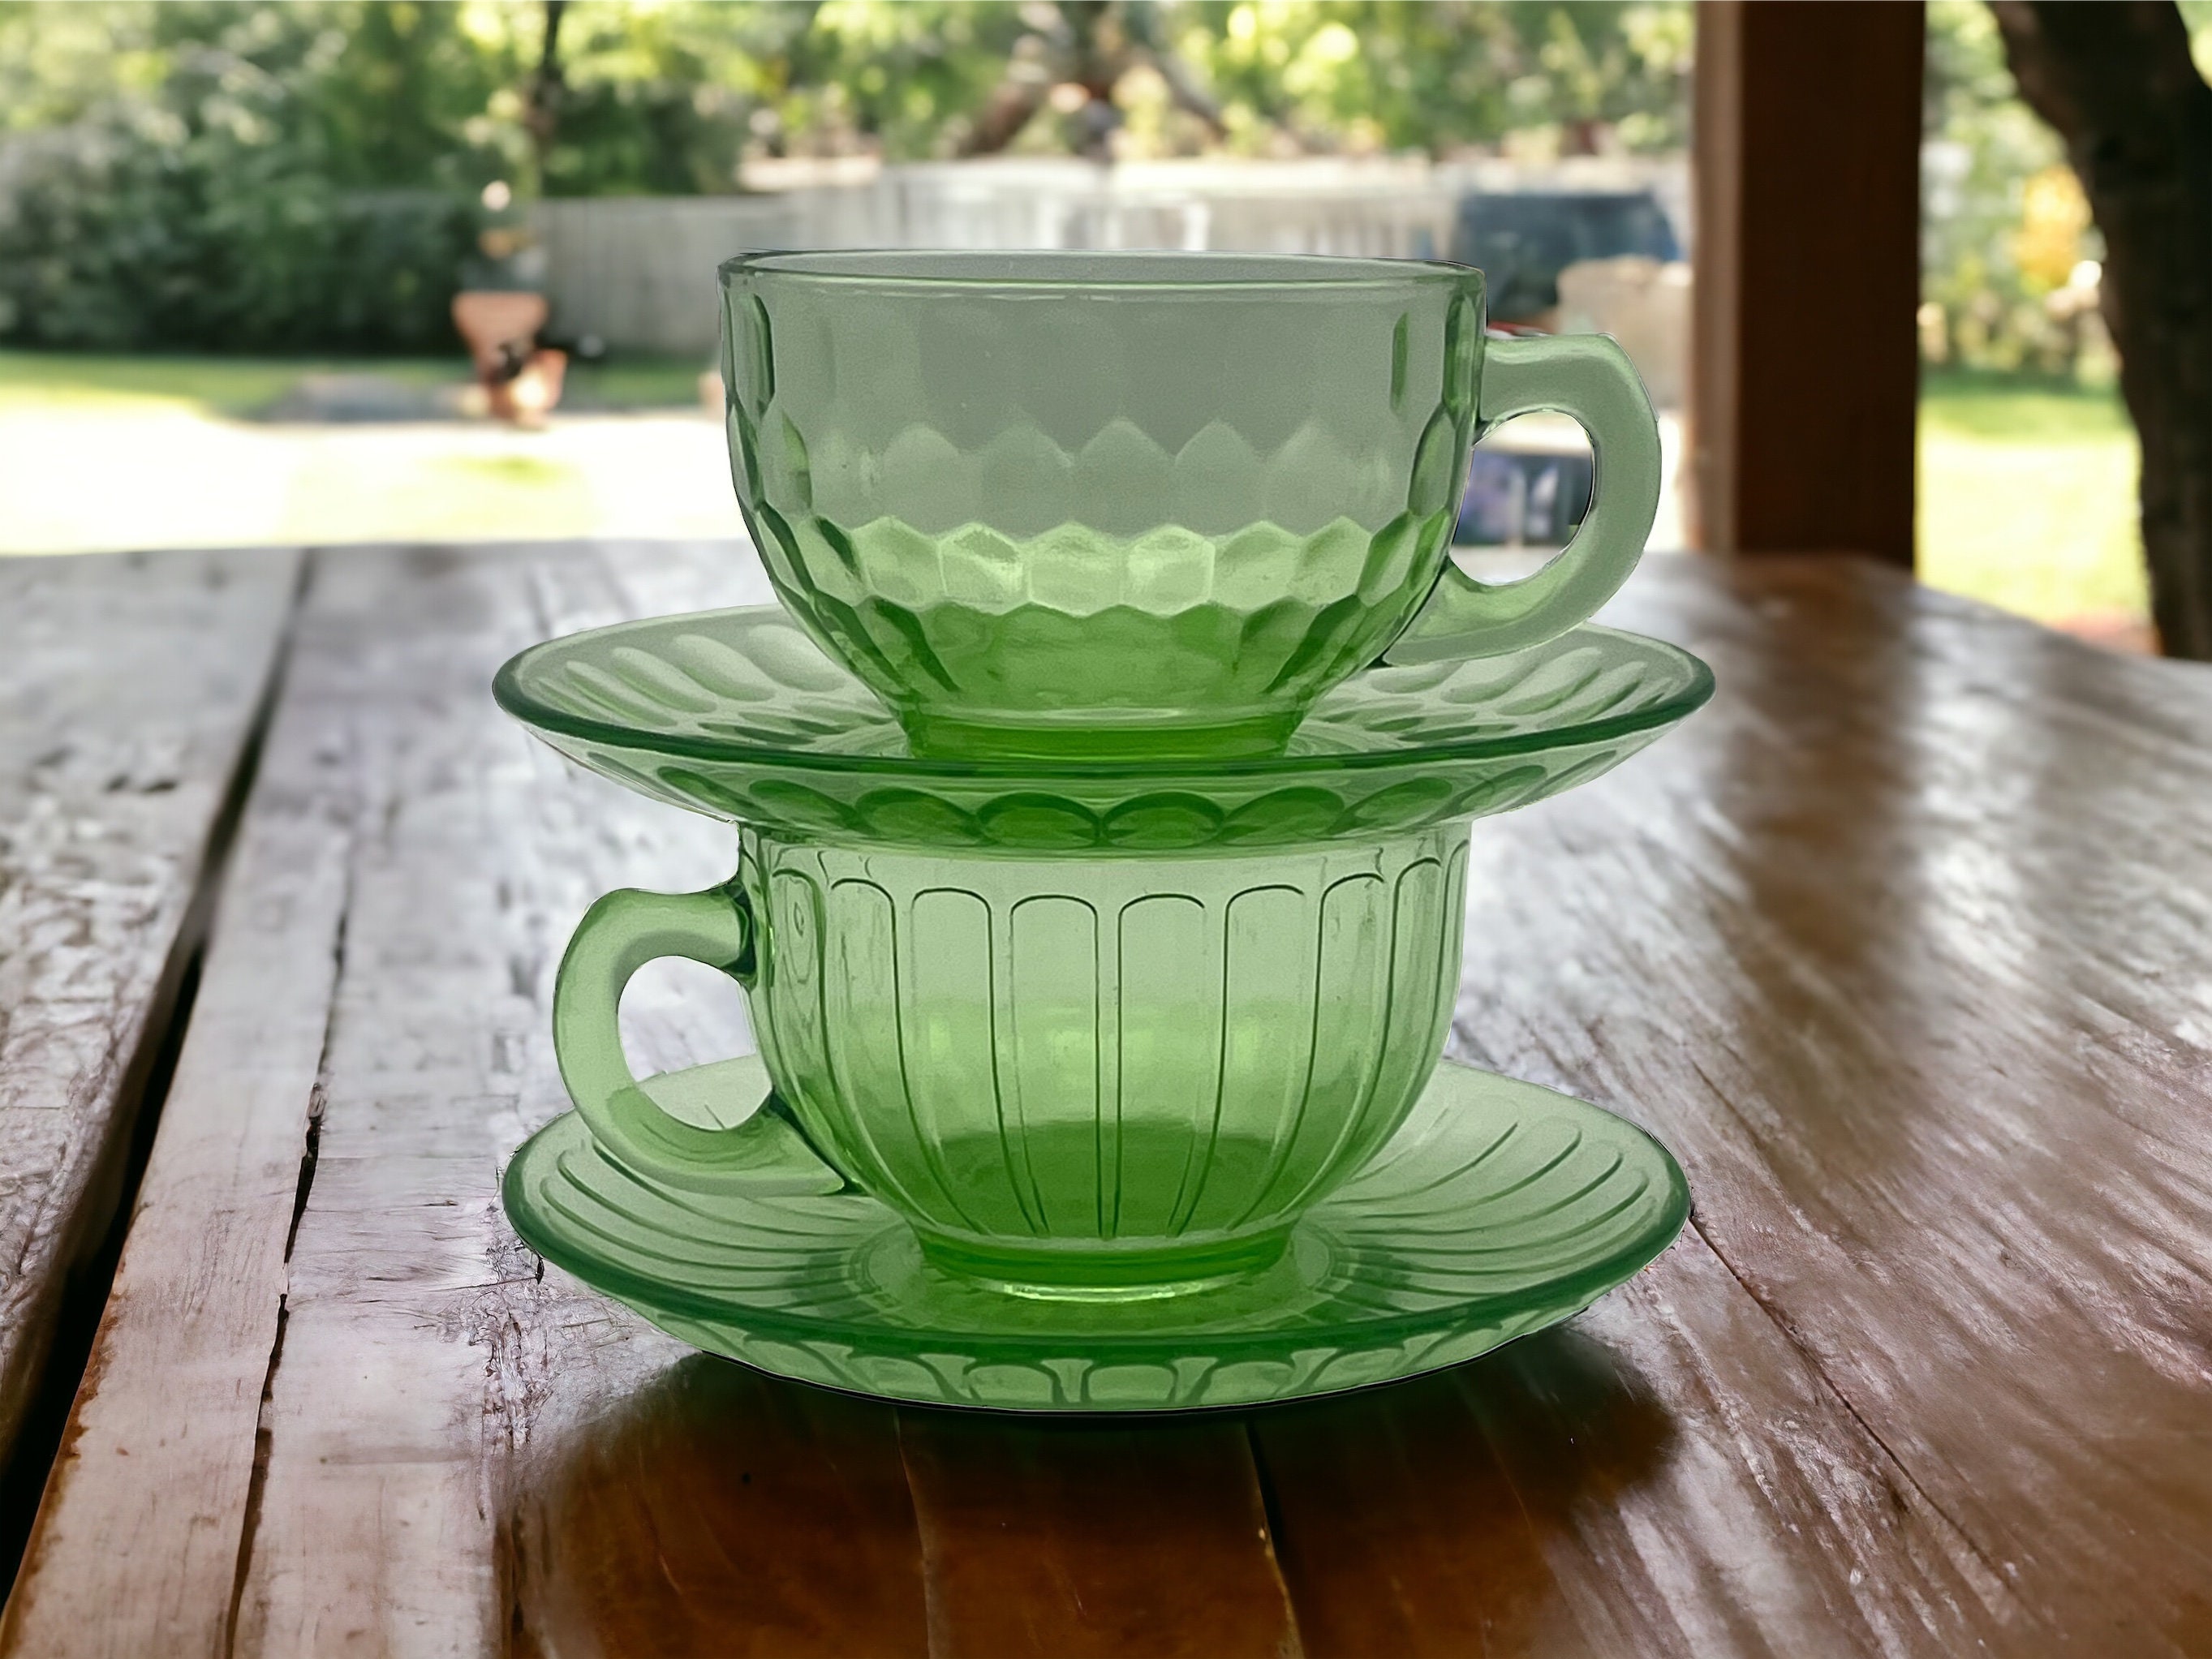 Green Parrot Depression Glass Cup and Saucer Set 